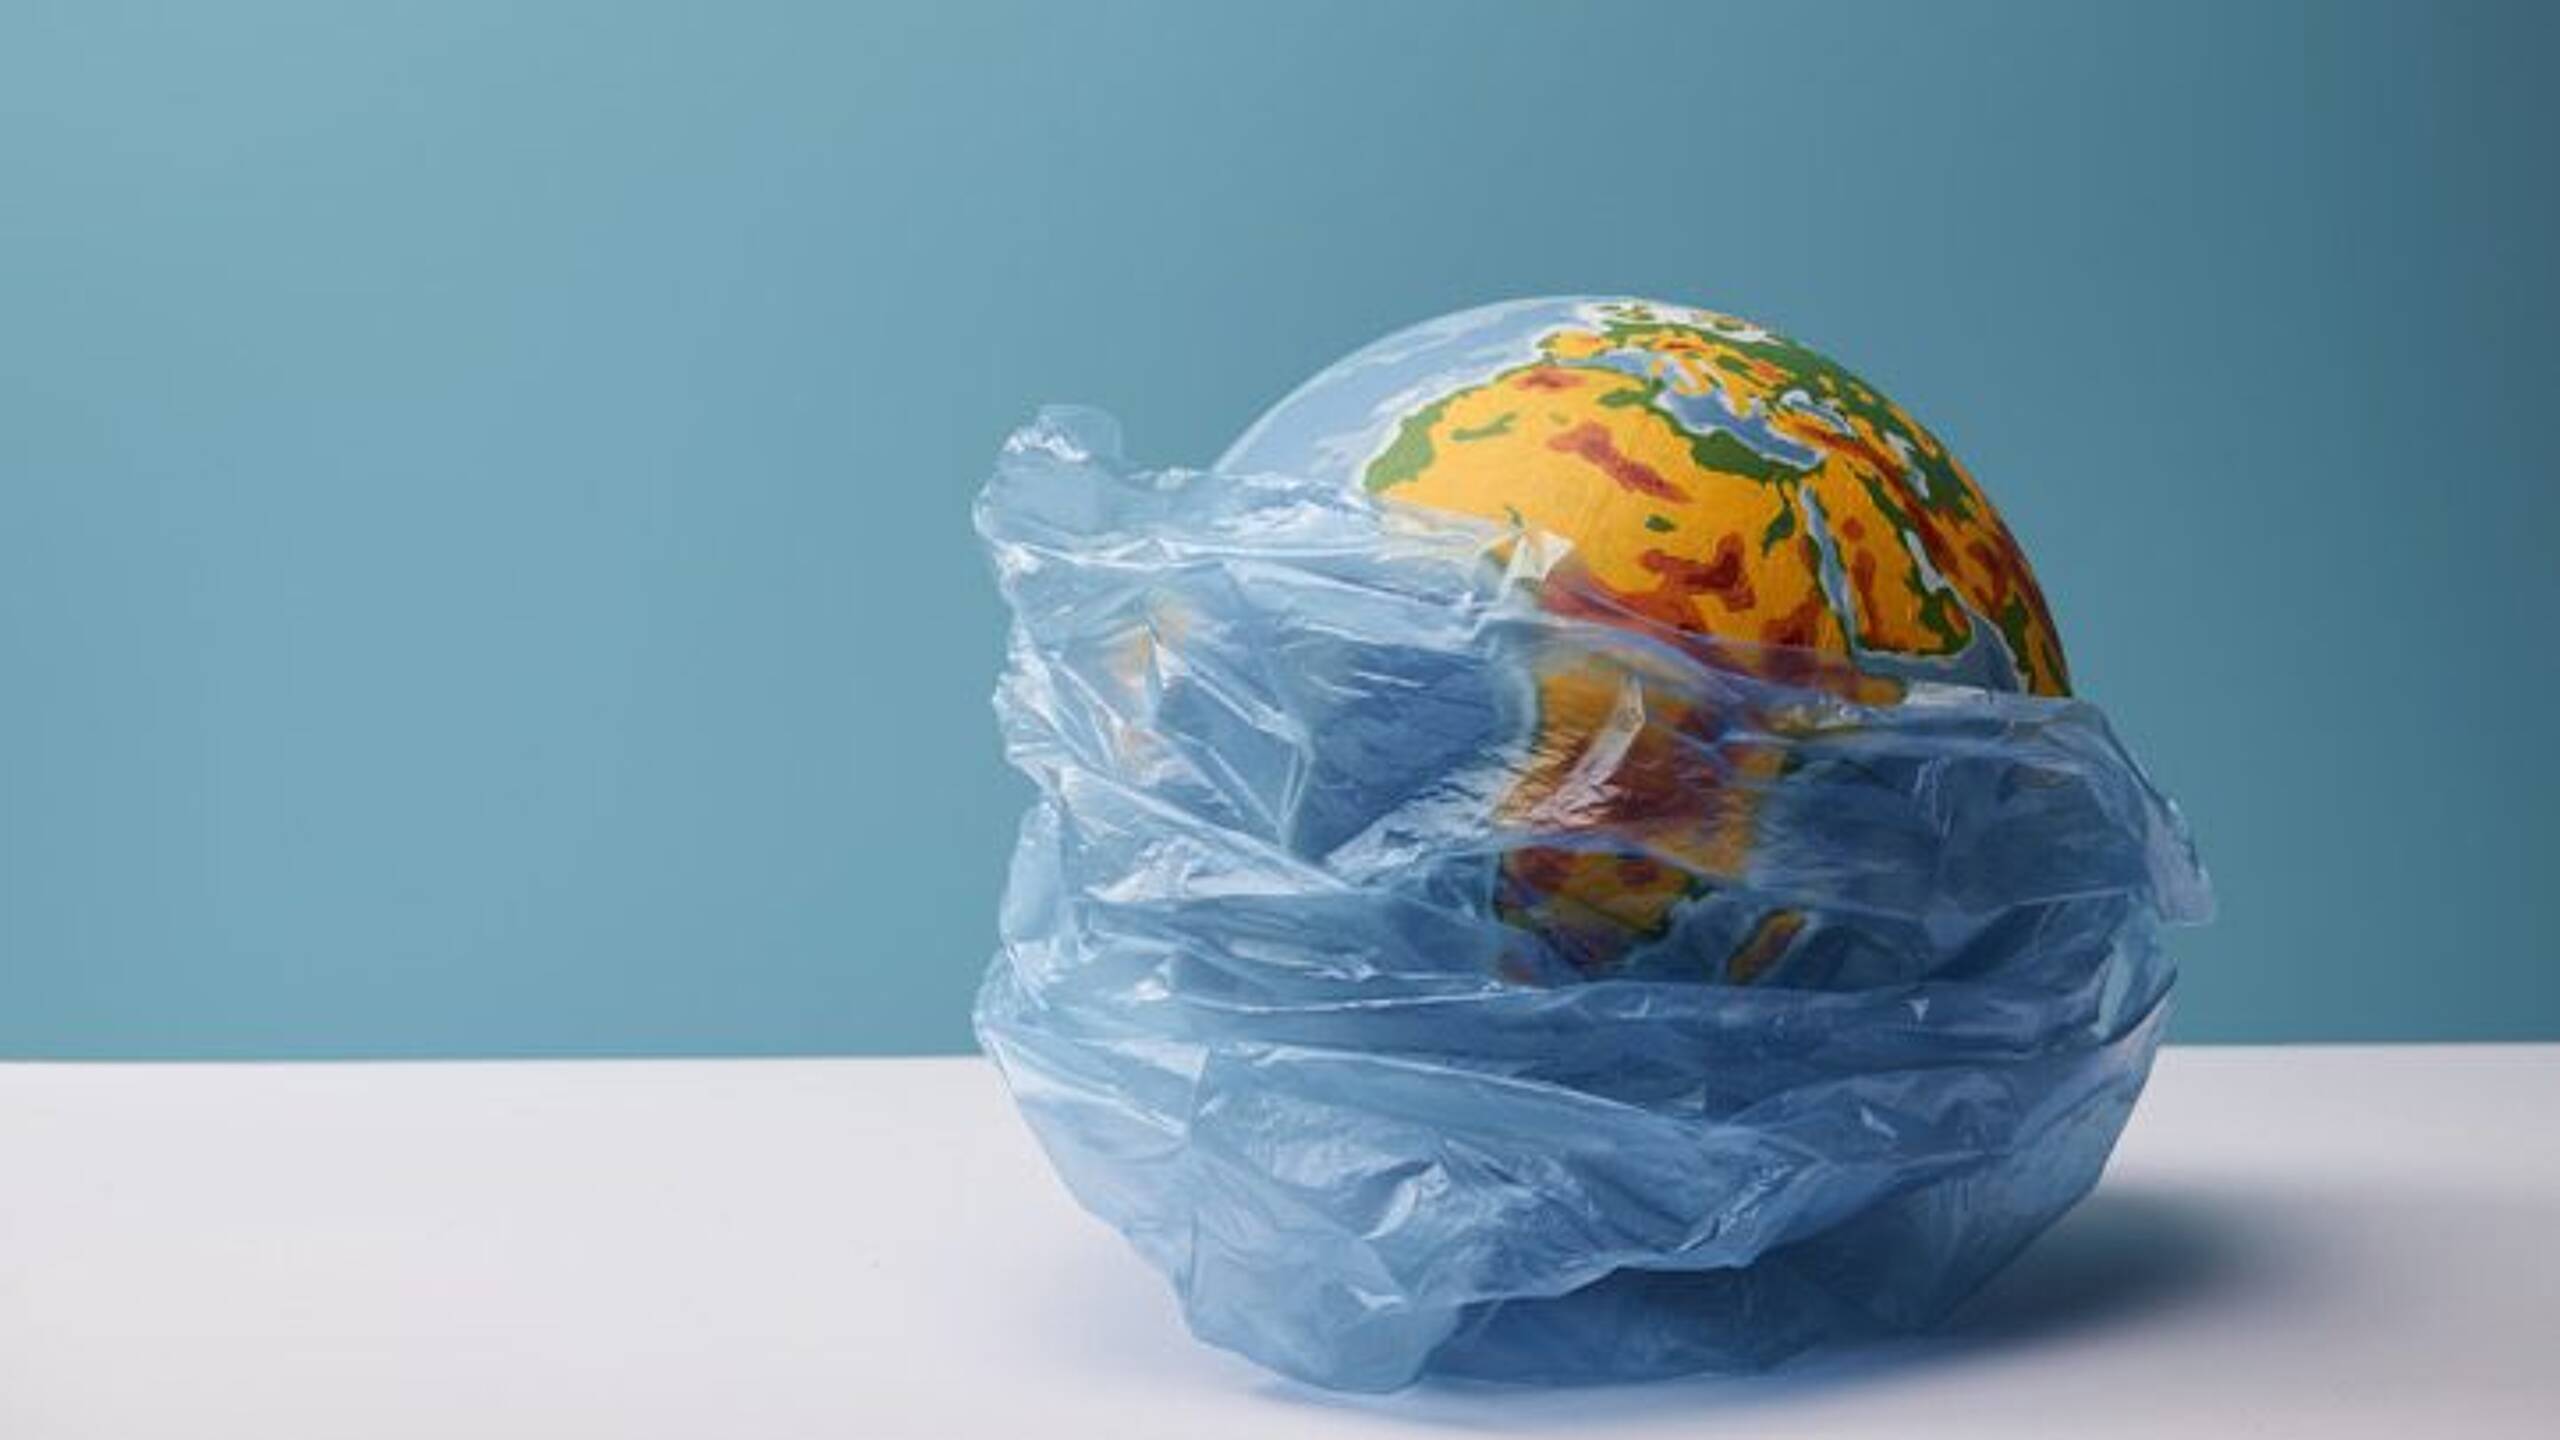 Creating a circular economy is vital to deal with our plastic and food waste challenges